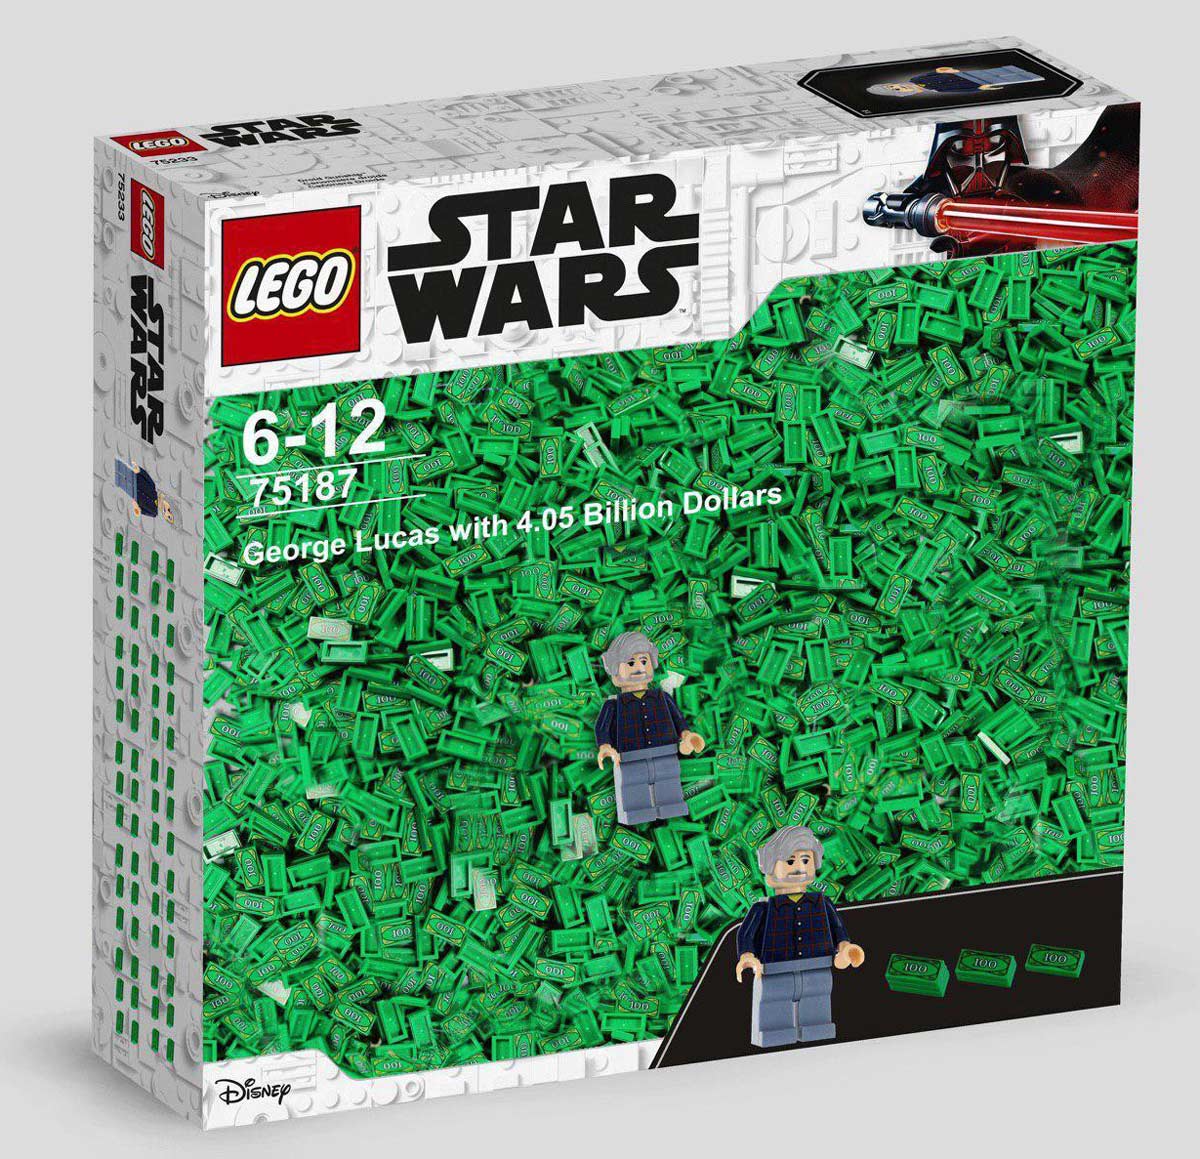 Lego sets get more and more realistic